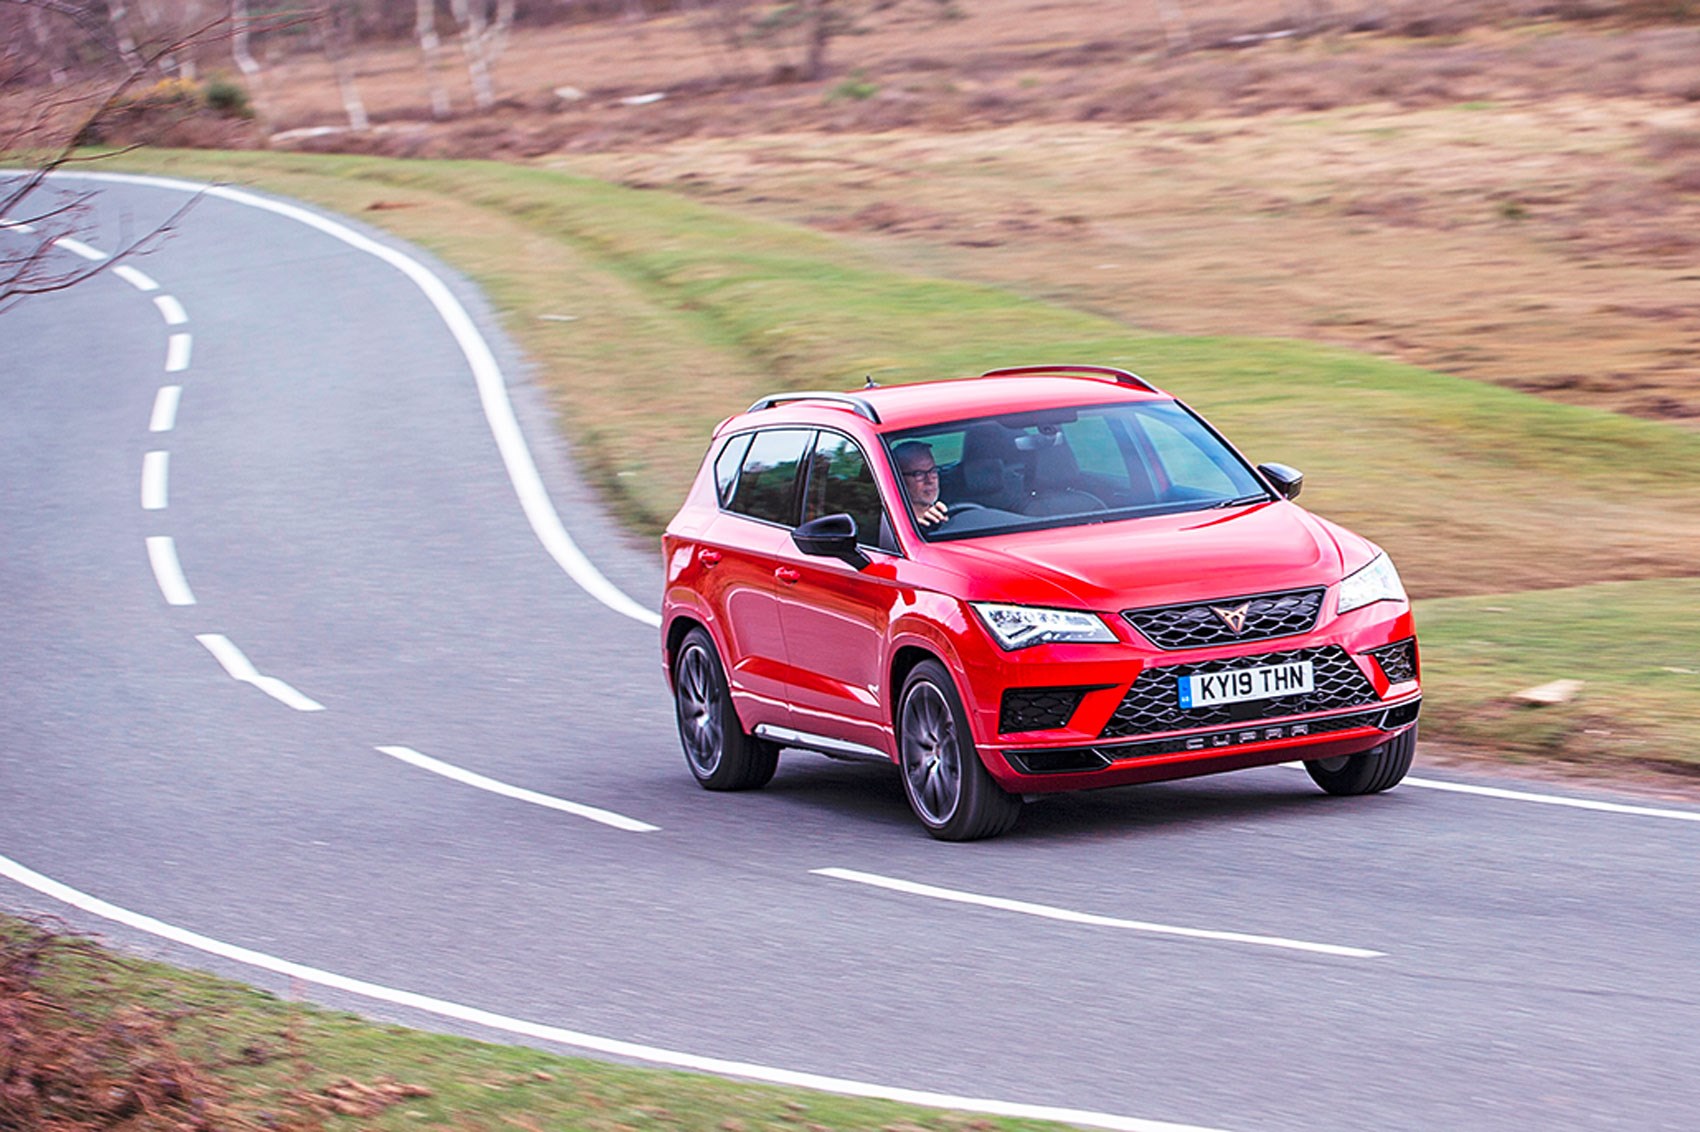 Same Show With Less Go: Cupra Ateca Loses Power and Appeal With